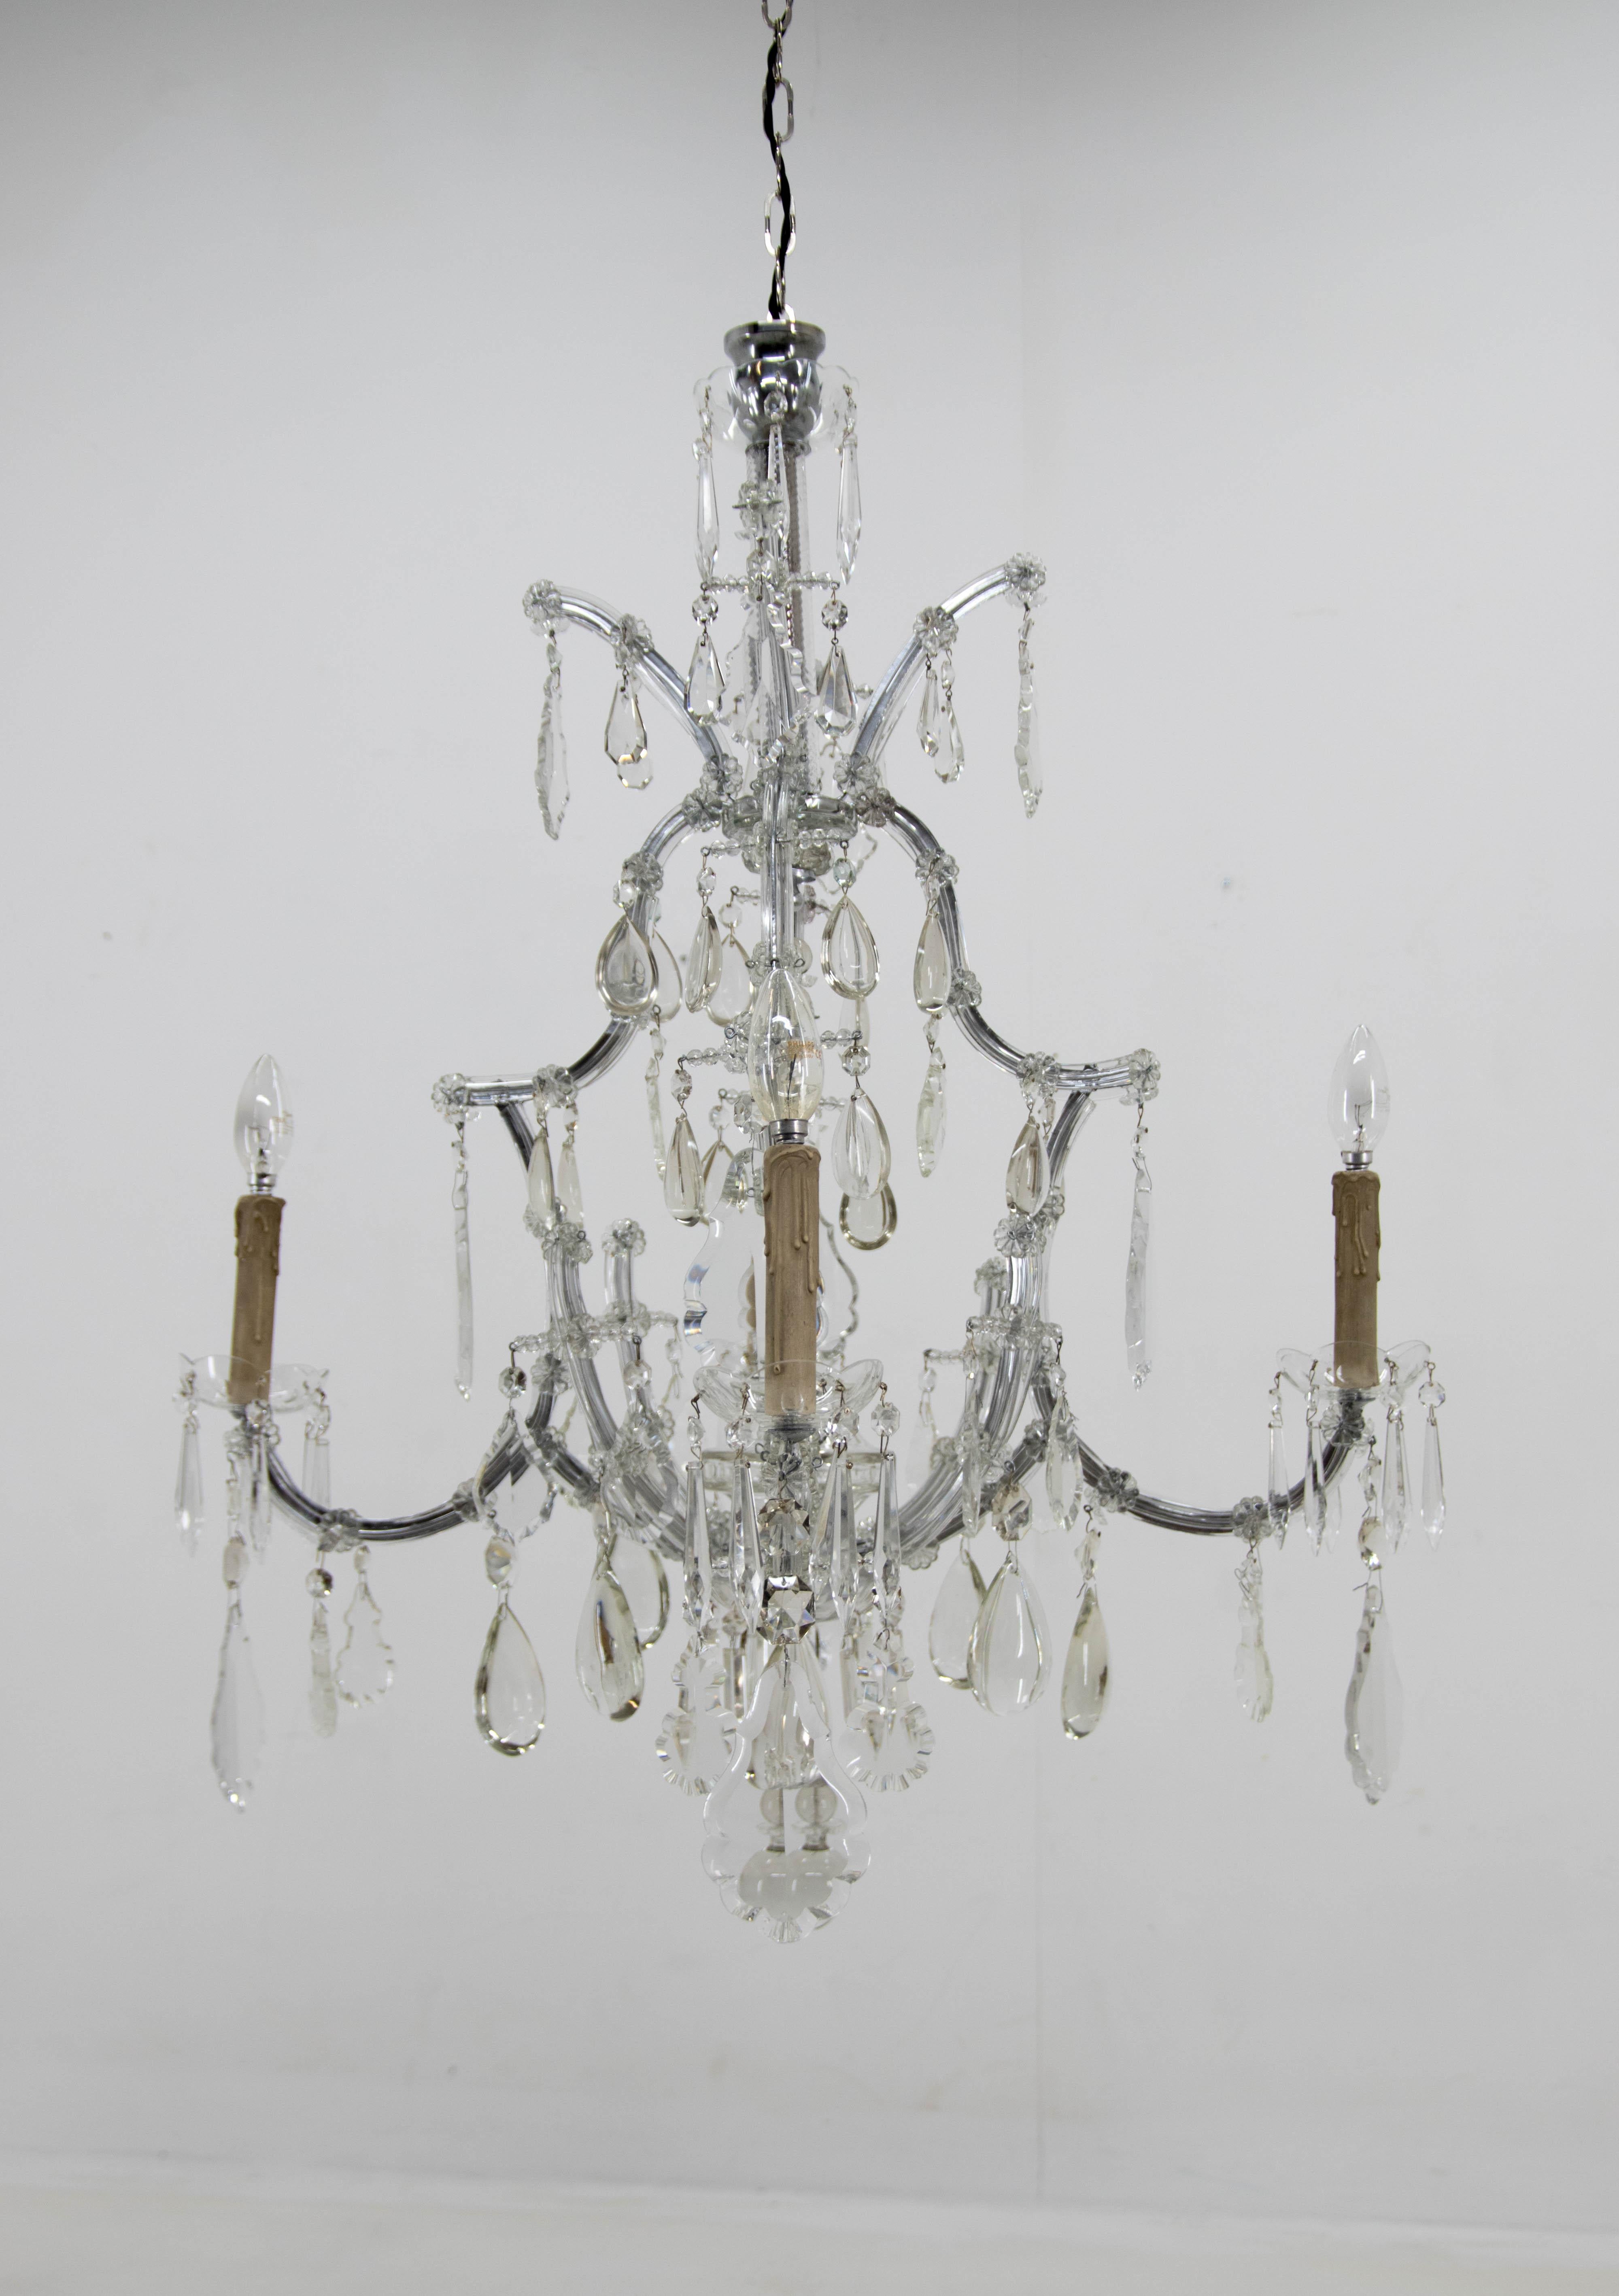 Early 20th Century Maria Theresa style chandelier in perfect condition.
Made in Austria, circa 1900
Carefully restored, disassembled, cleaned and assembled again.
No parts missing.
The height without chain: 110cm
rewired: 4x40W, E12-E14